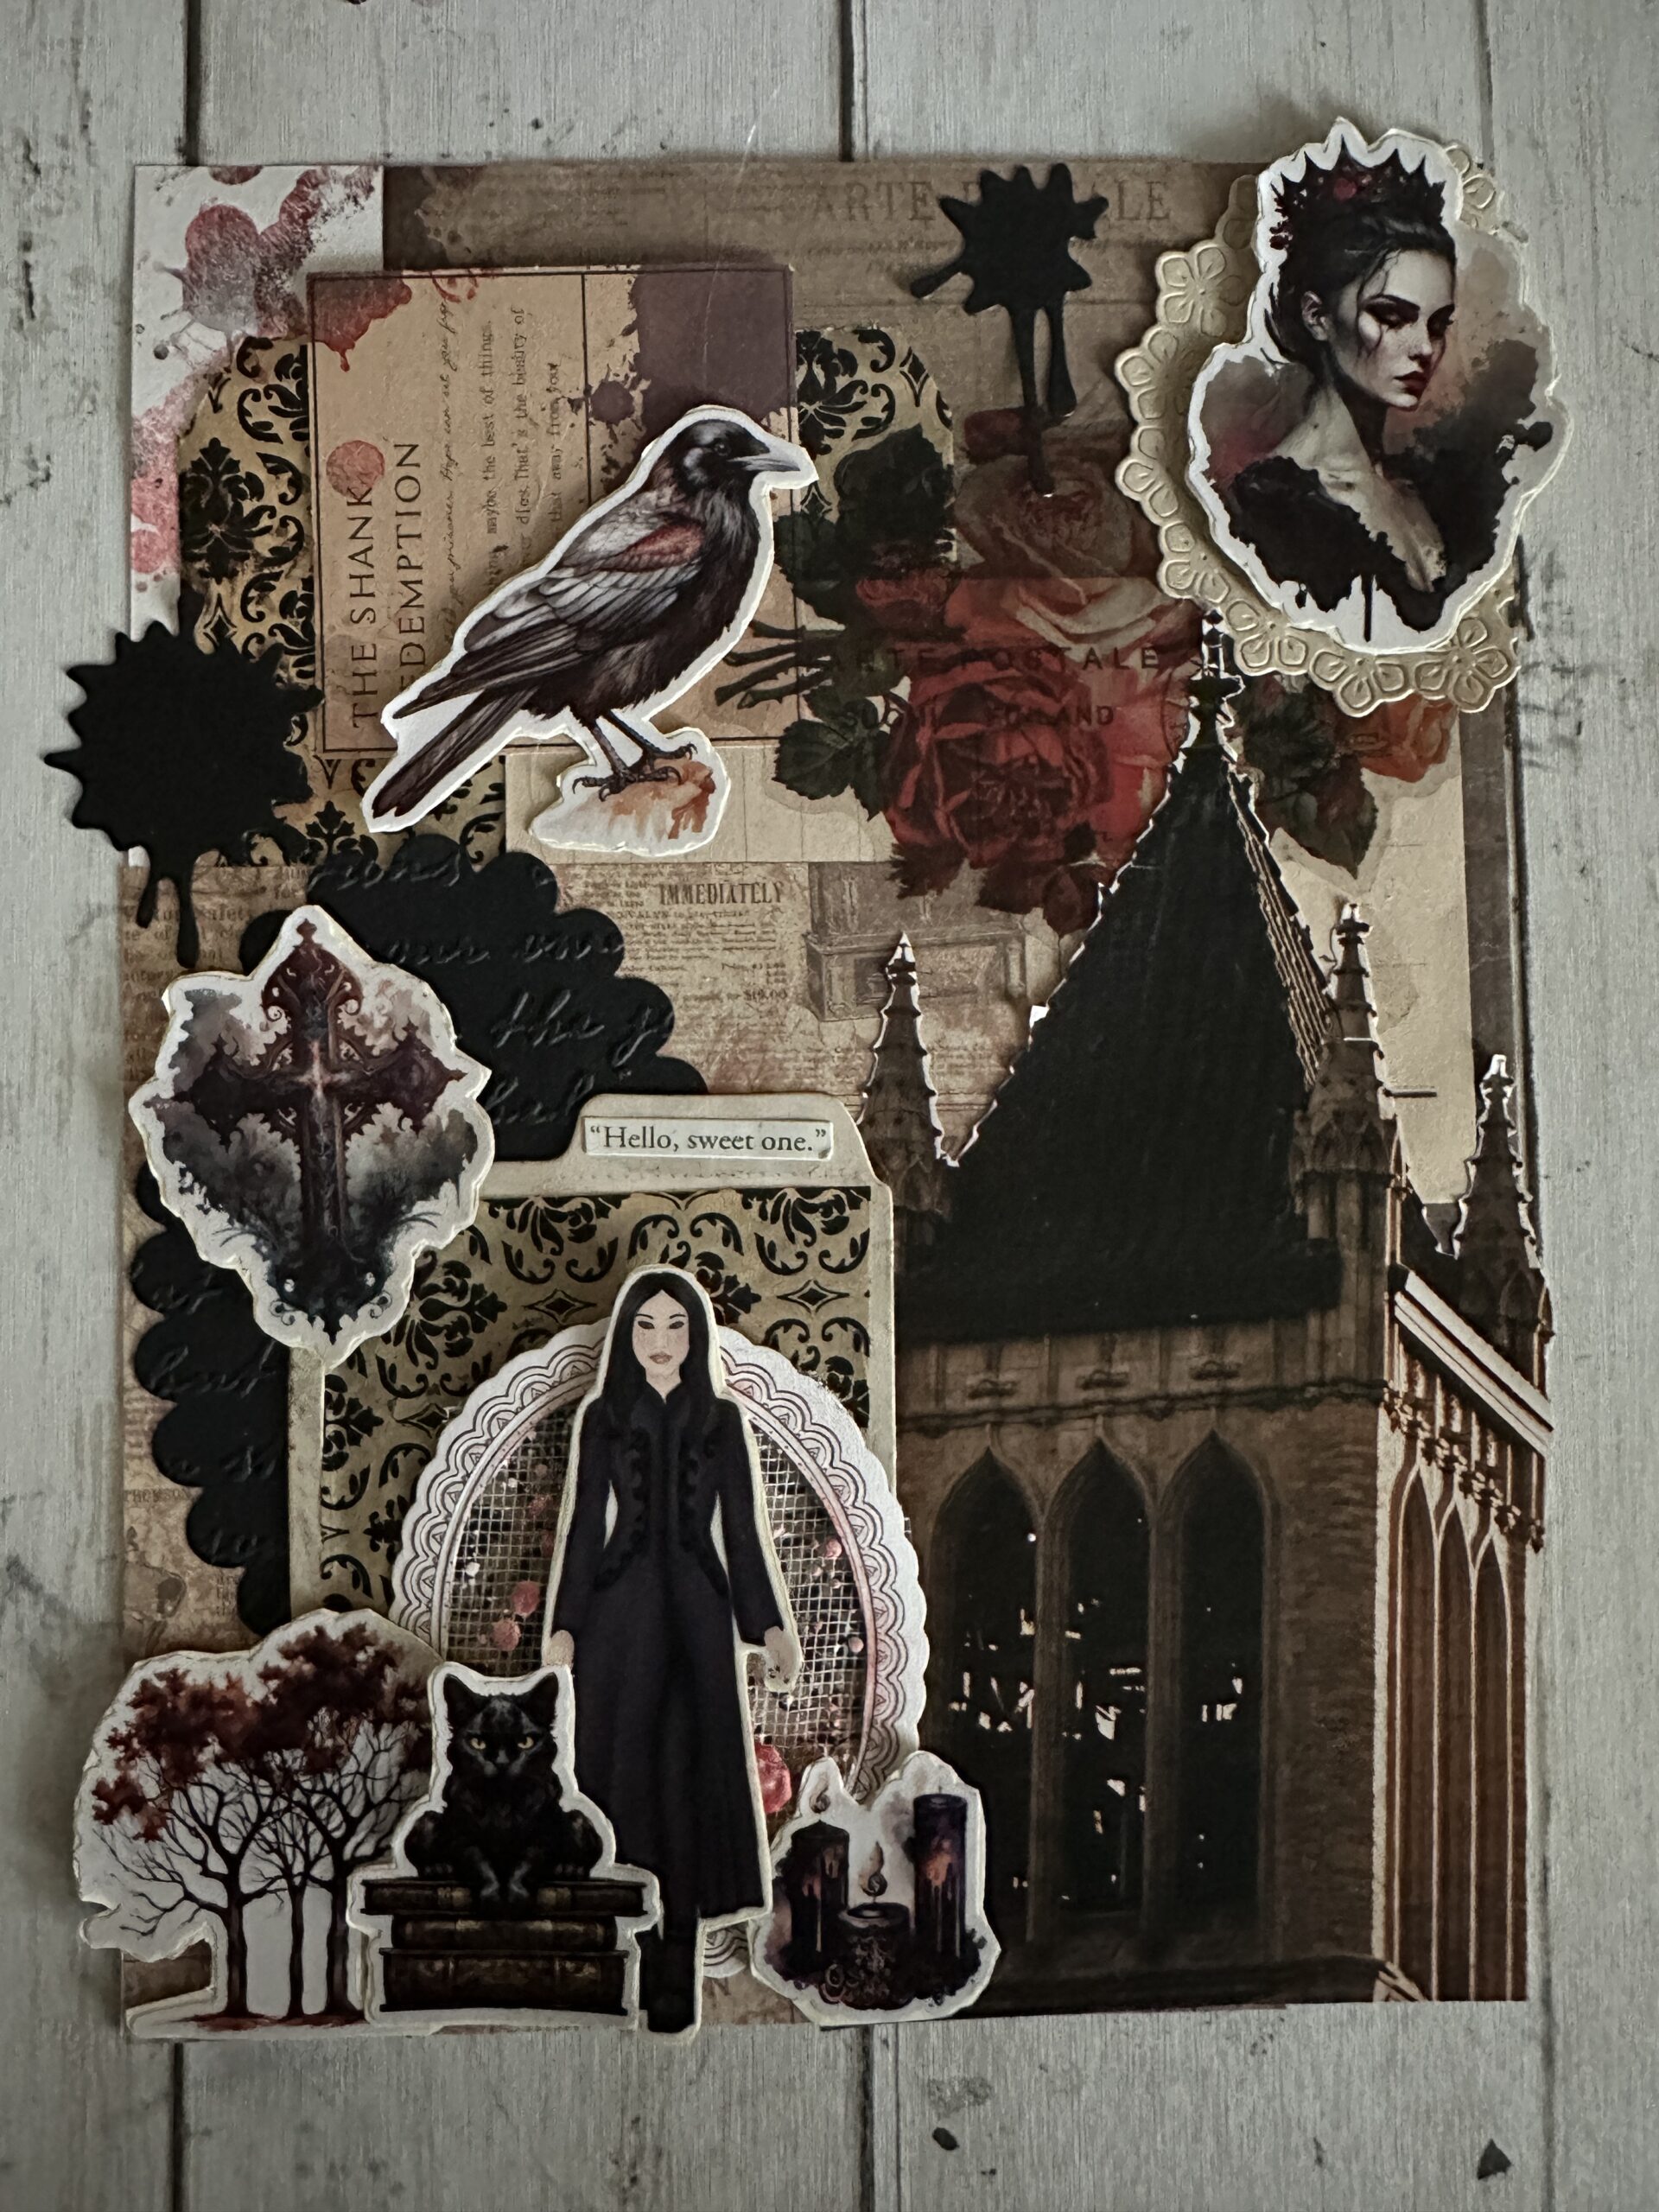 Junk journal page with a gothic building tower surrounded by stickers of a gothic looking woman, black cats, a cross, a raven, candles, a spooky forrest, and another picture of a woman who has turned into a vampire